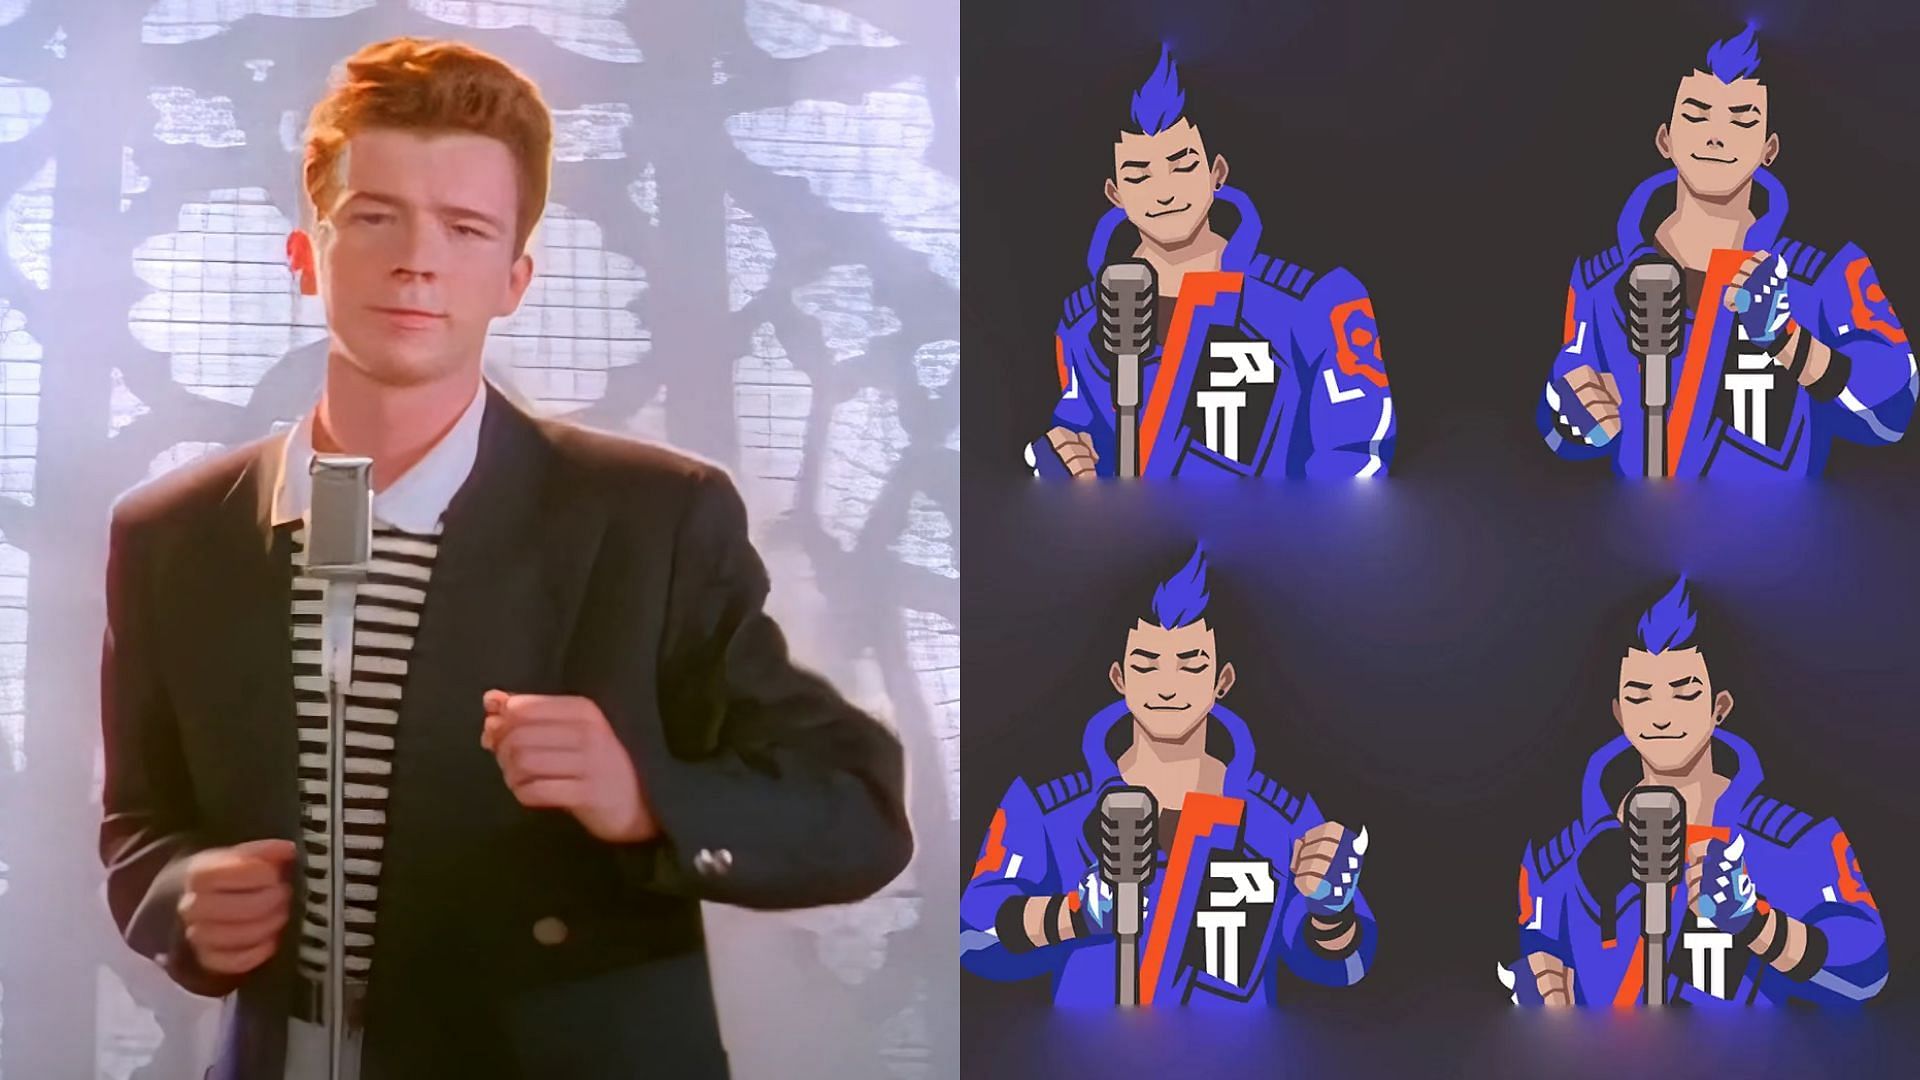 Animated spray showing Yoru dancing like Rick Astley in the &#039;Never Gonna Give You Up&#039; music video (Image via Riot Games)